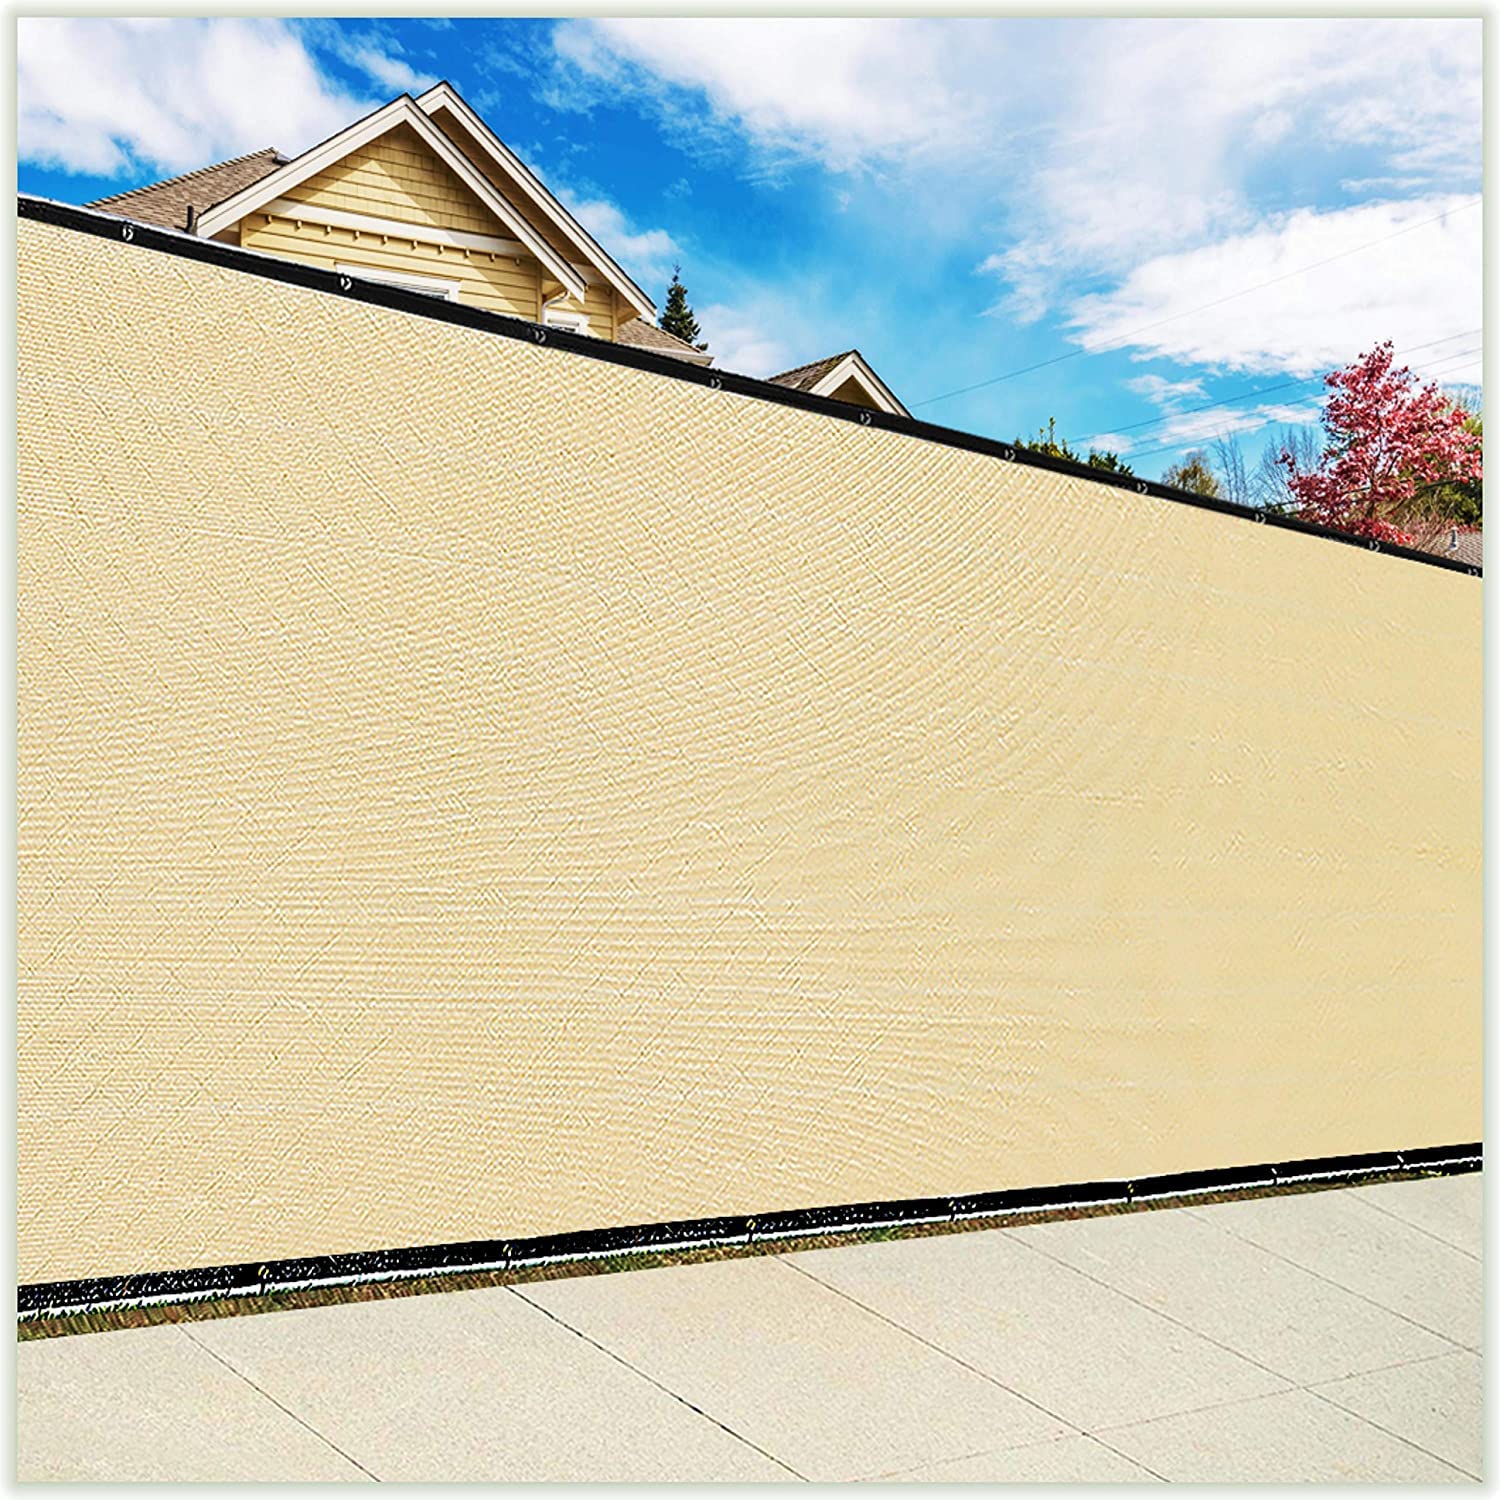 colourTree customized Size Fence Screen Privacy Screen Beige 8 x 150 - commercial grade 170 gSM - Heavy Duty - 3 Years Warranty 